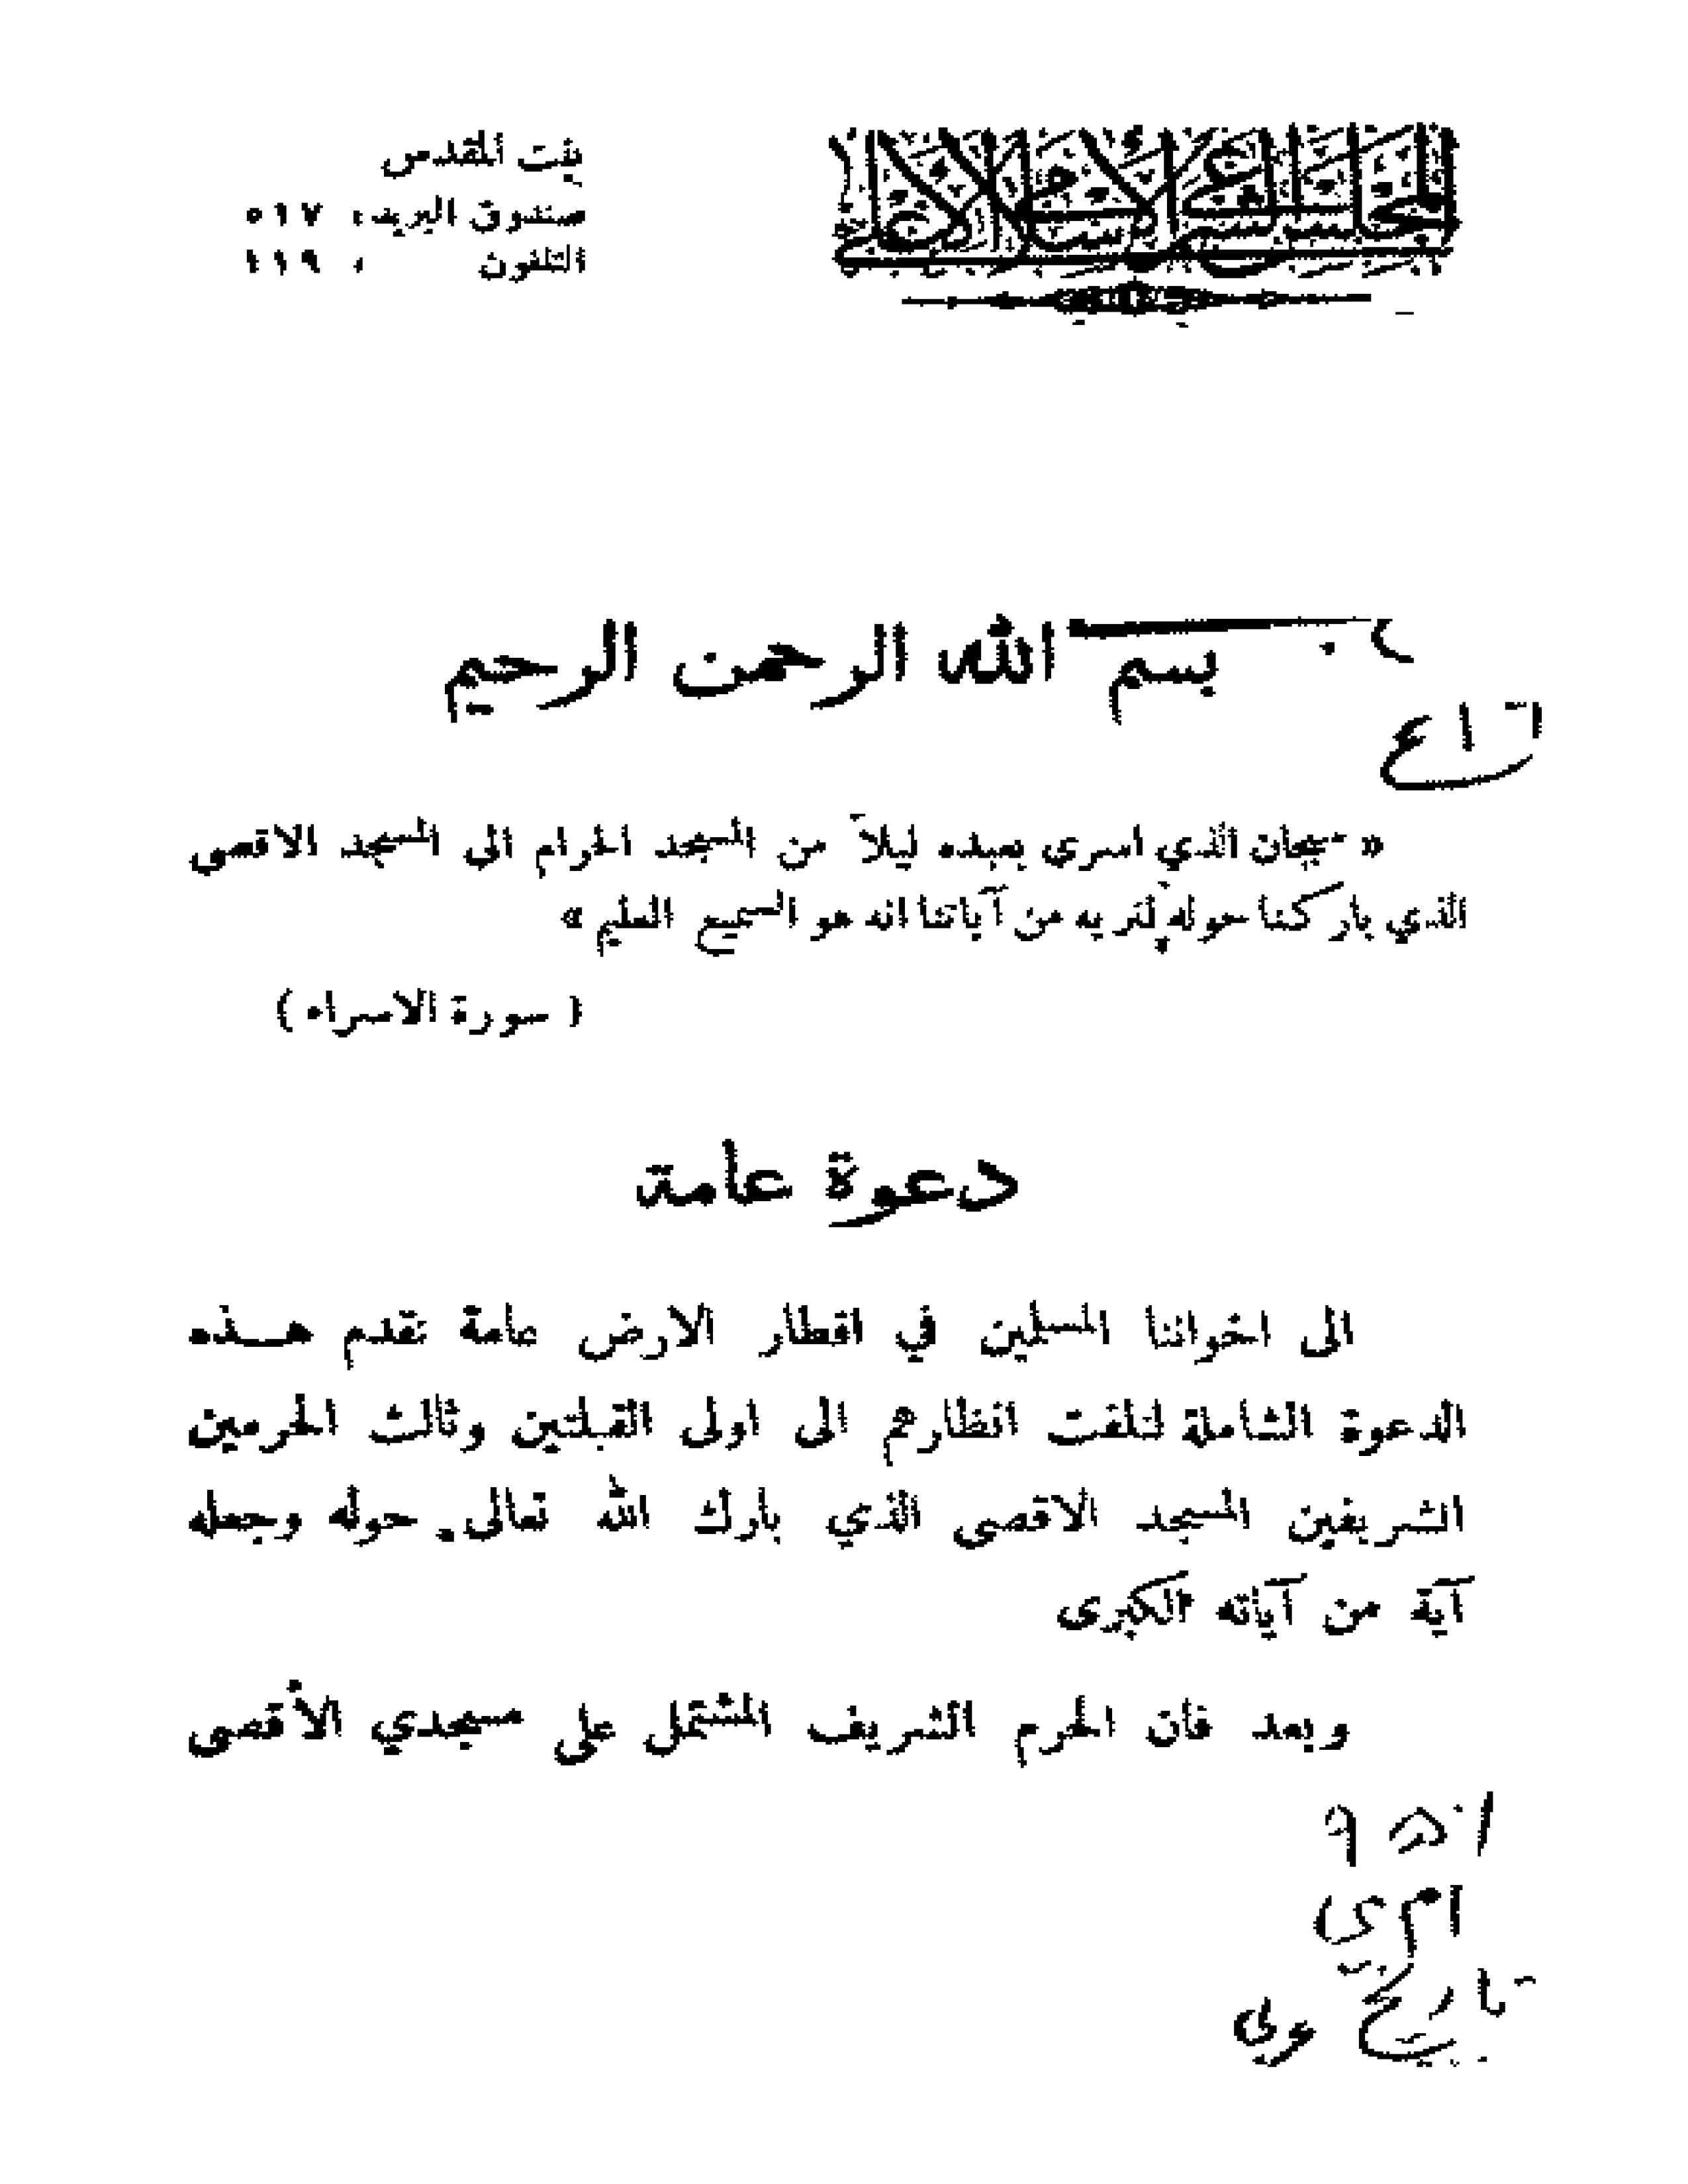 An Educational Booklet Published by the Supreme Islamic Council in 1927